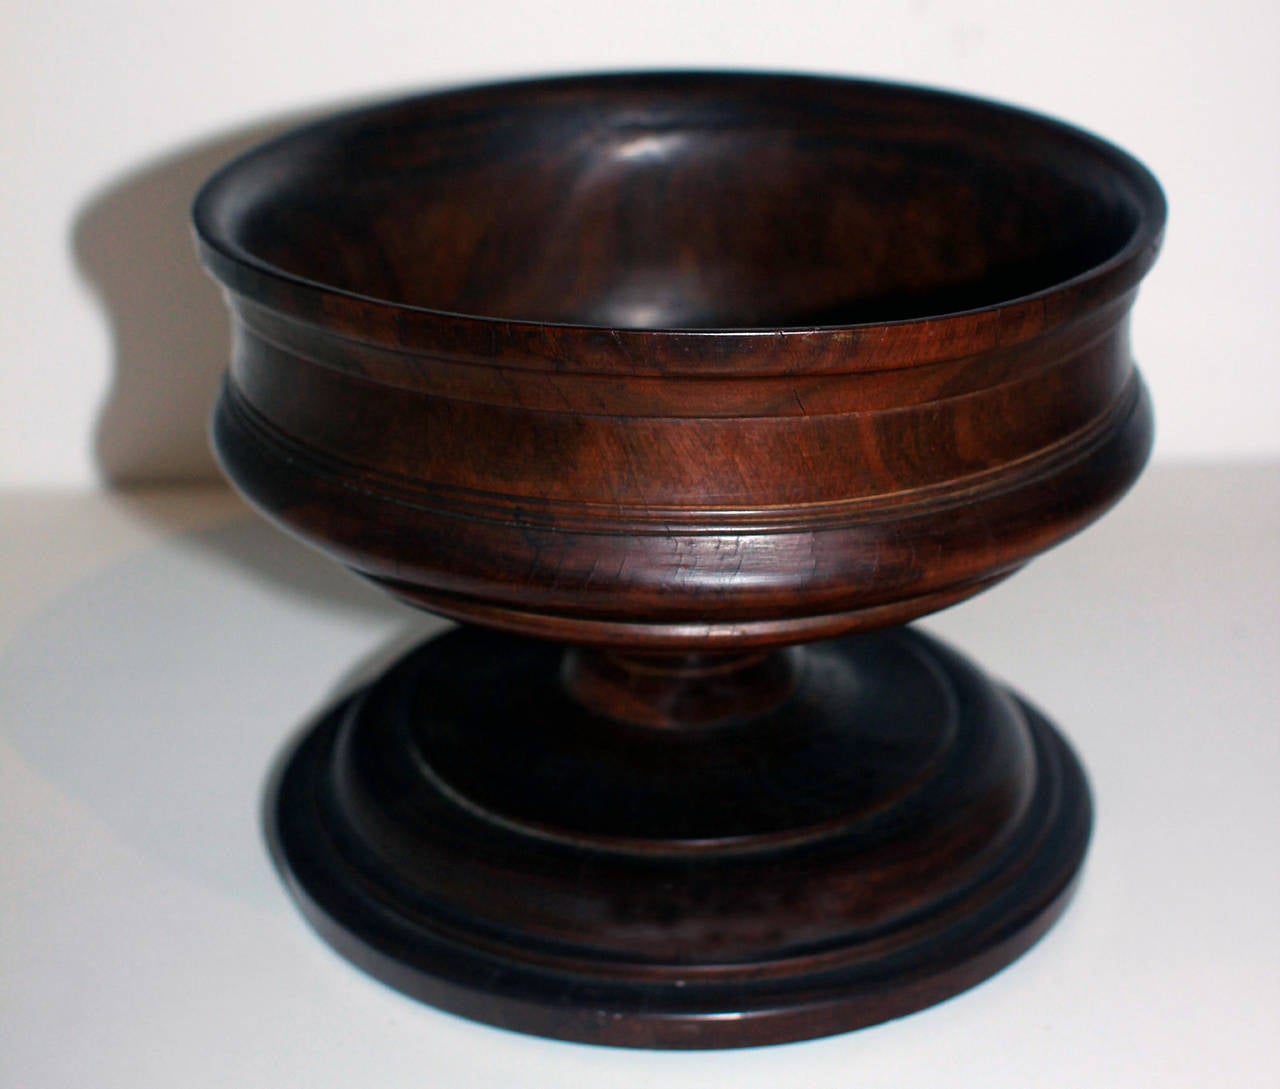 Handsome, heavy compote made of turned lignum vitae - a dark, strong and dense wood. Early 19th century, wonderful rich color and patina.